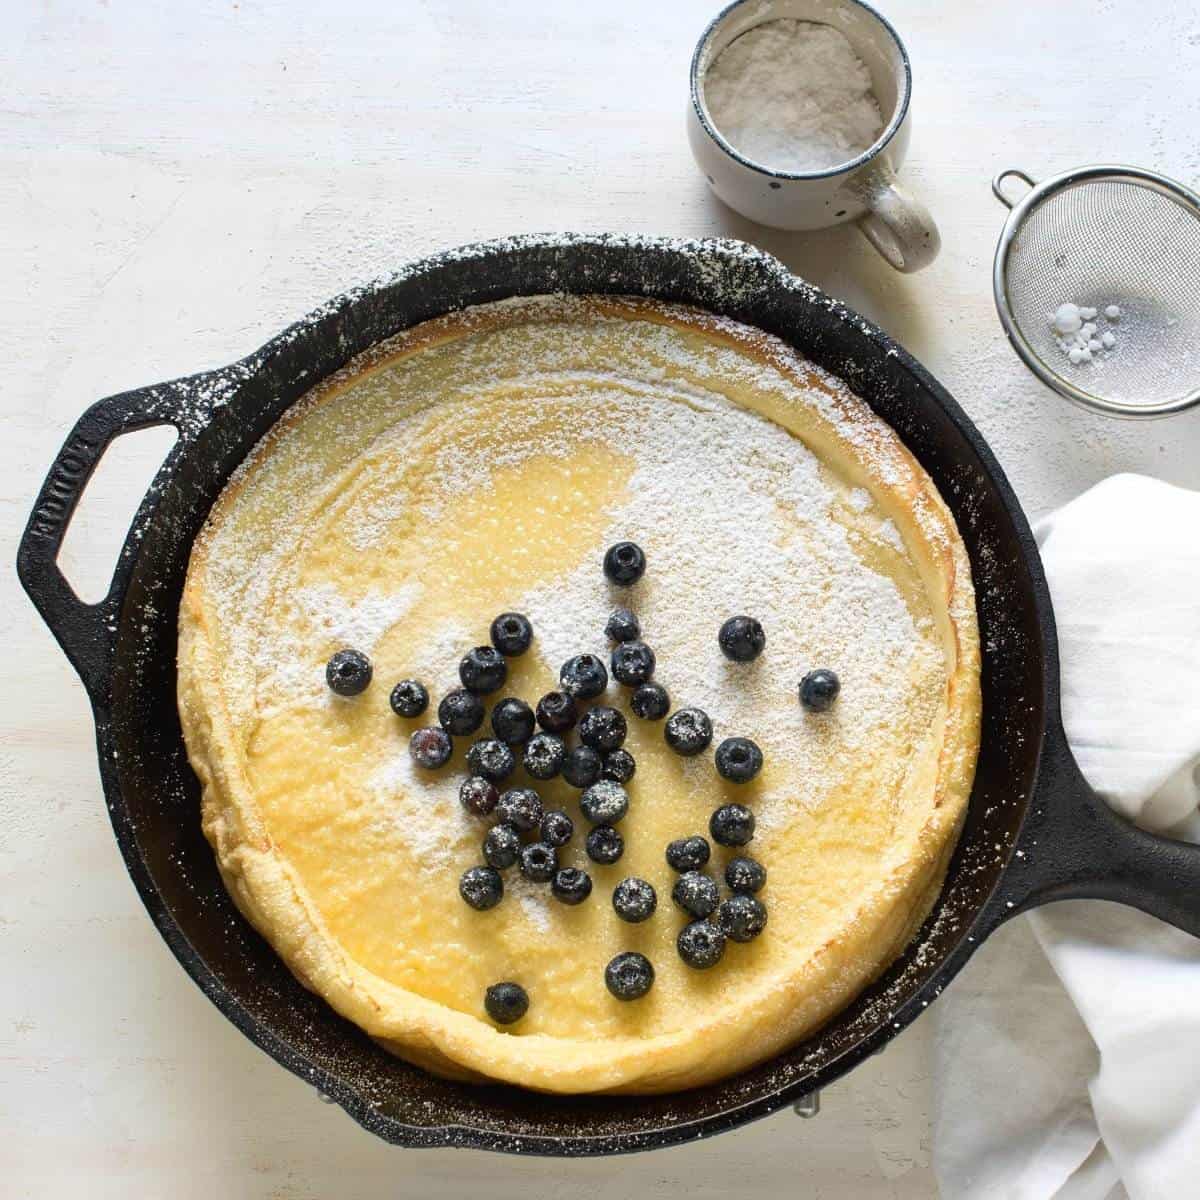 Puffed pancake in a skillet, sprinkled with powdered sugar, with blueberries.